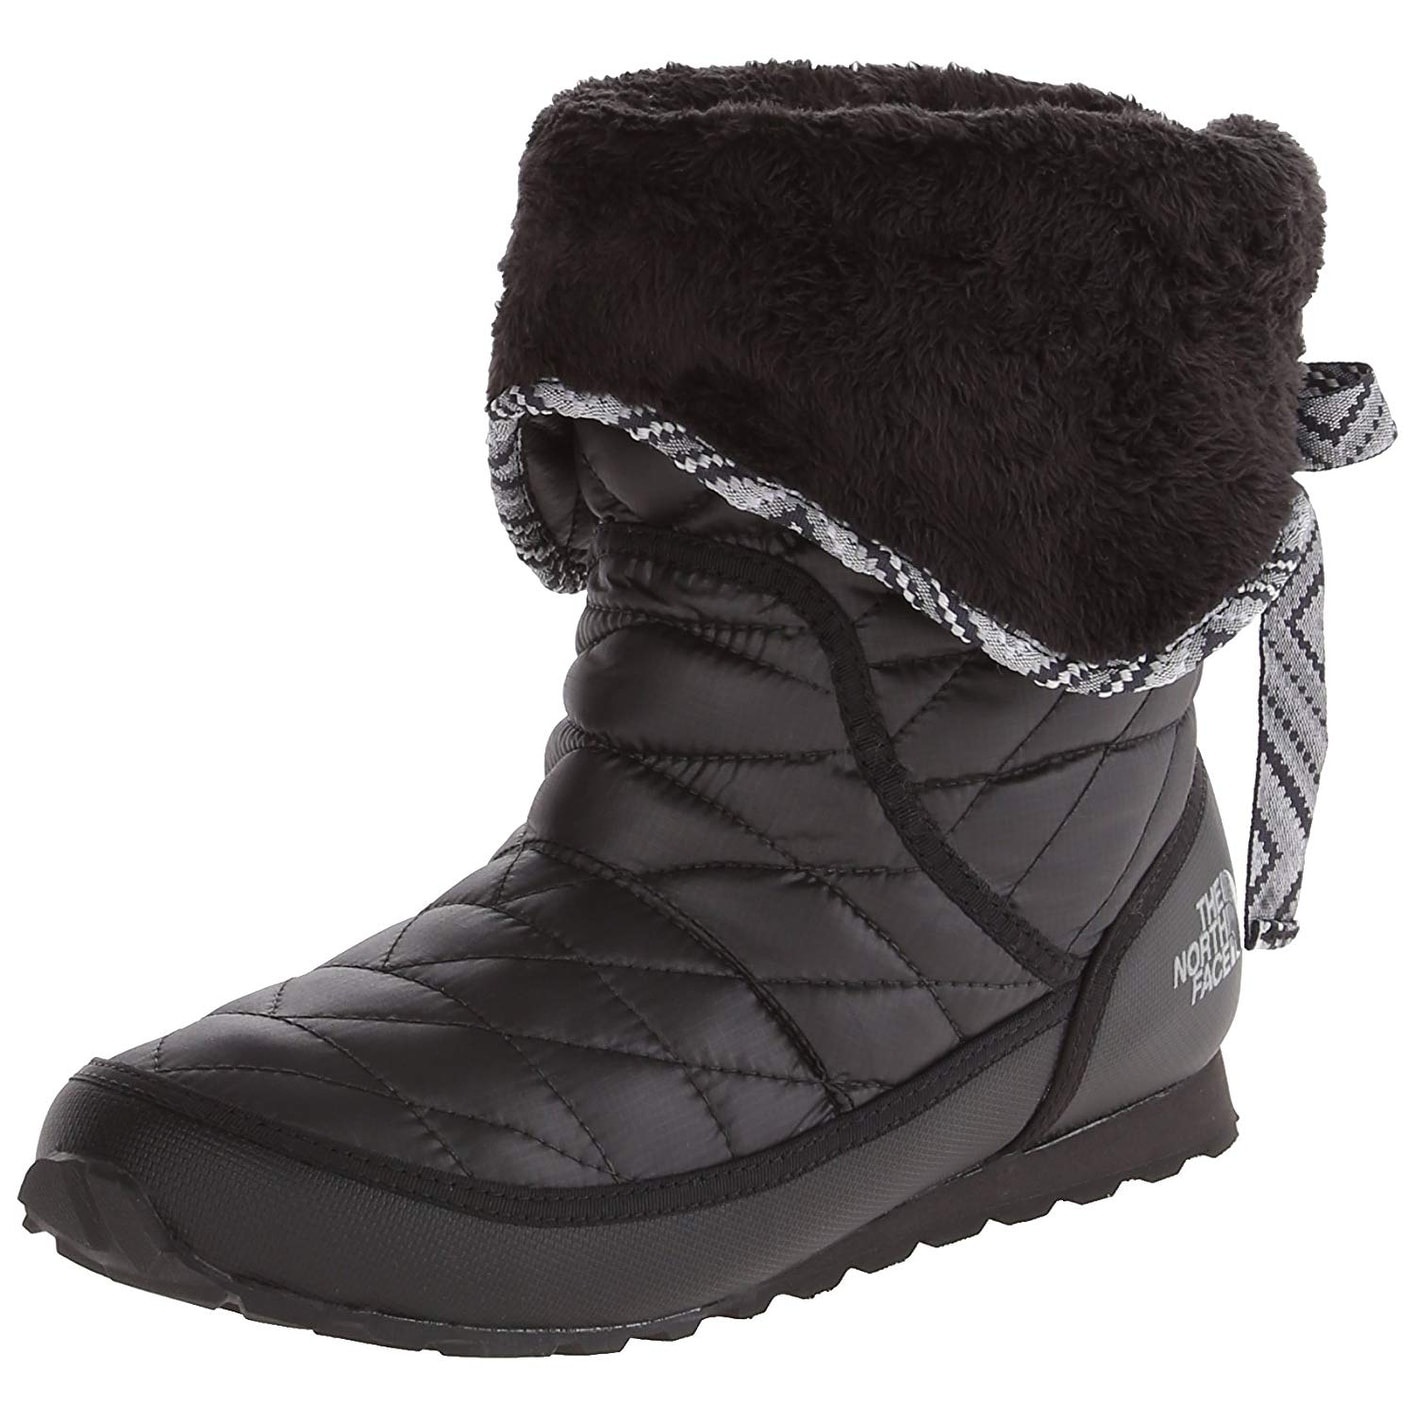 north face boots womens bootie Online 